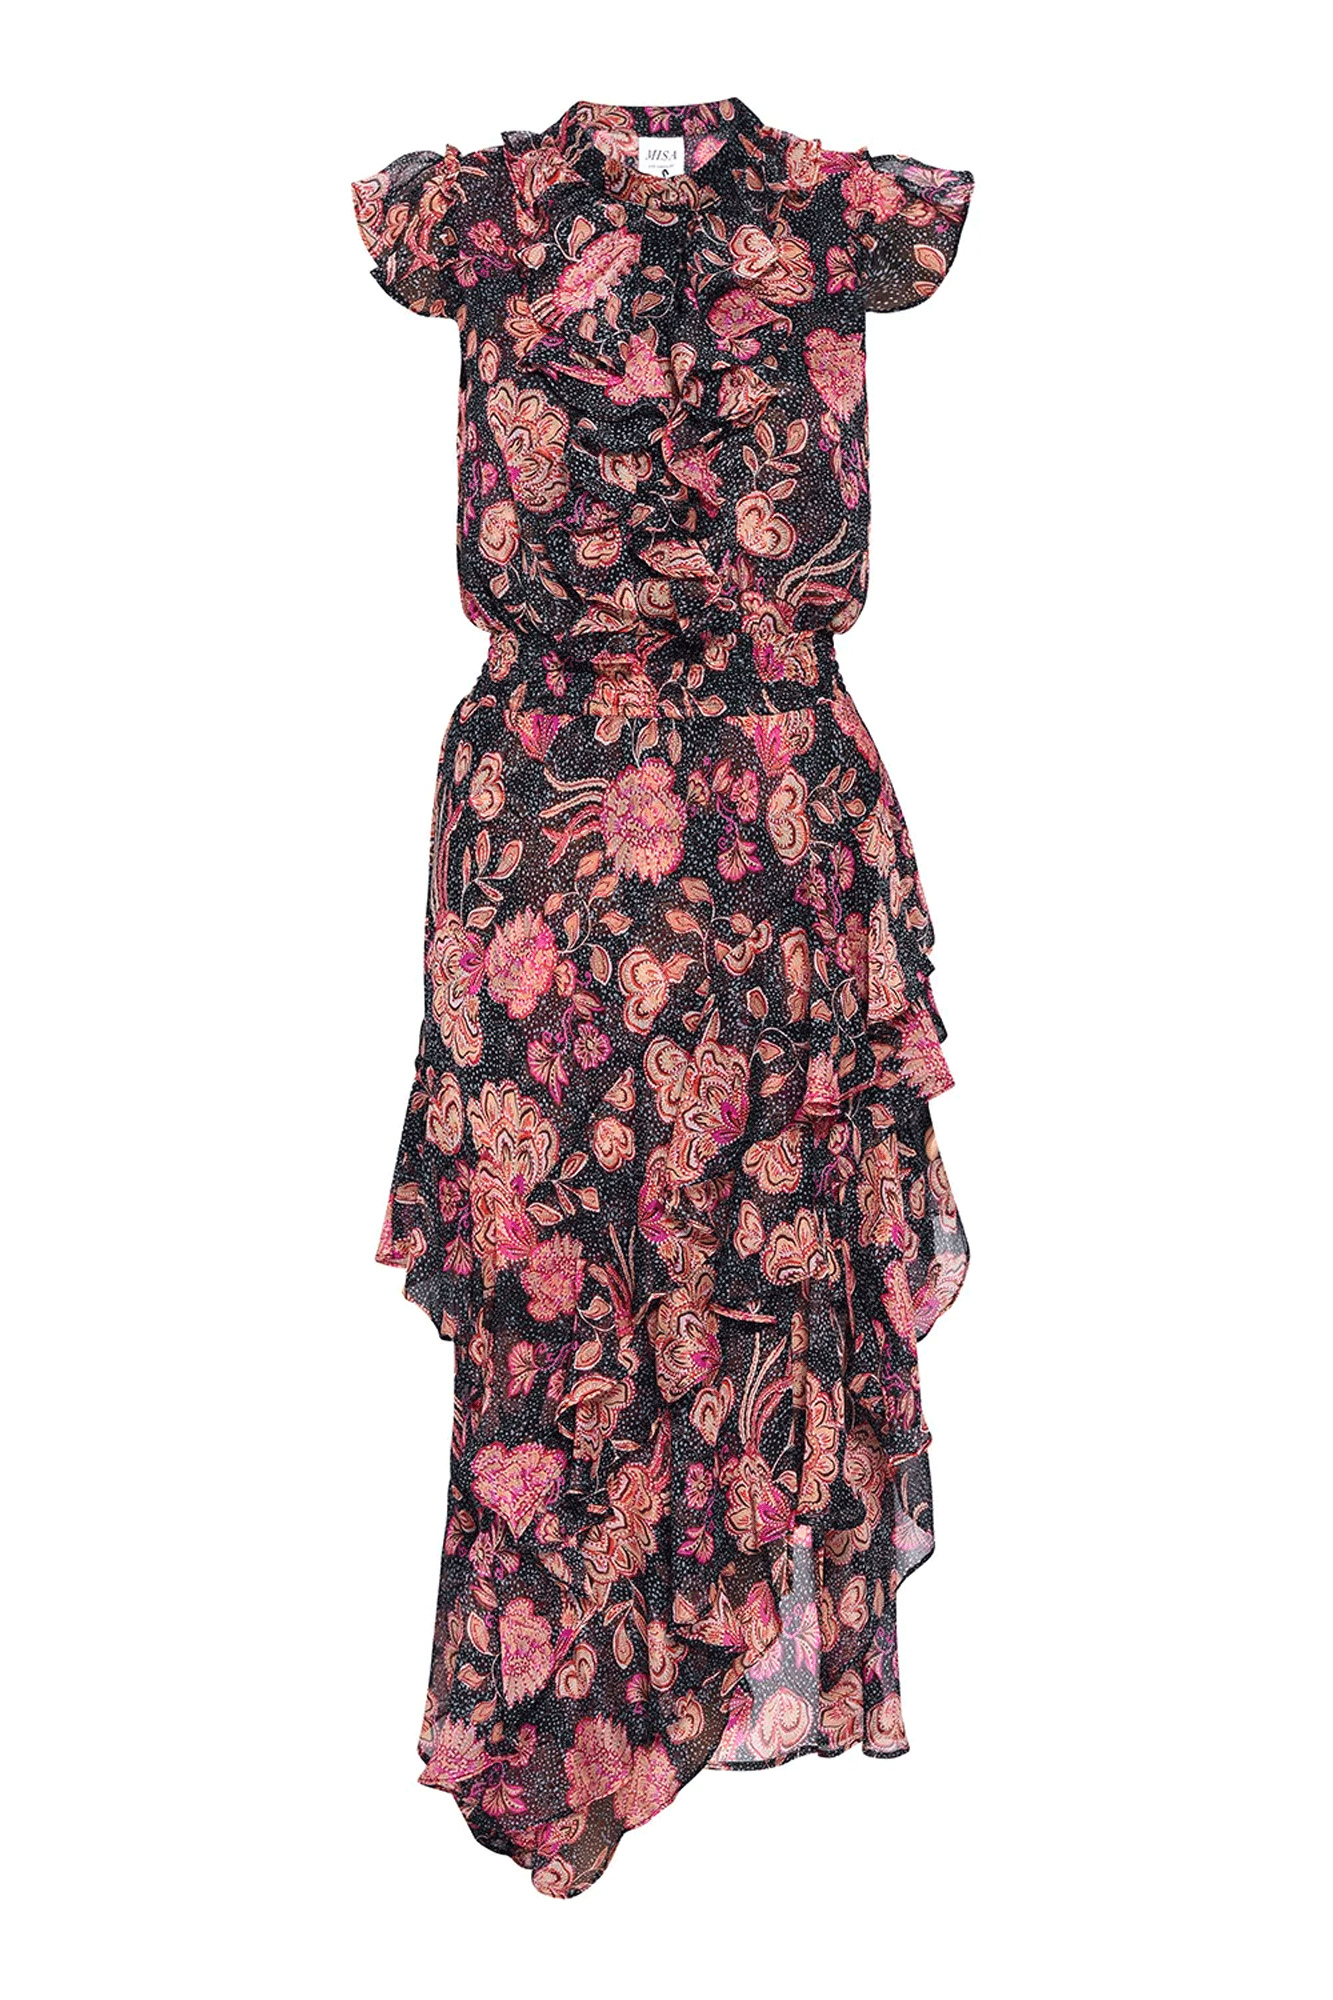 Look your best in the Ilysa Dress from Misa. Crafted with airy chiffon and an eye-catching pink and navy floral print